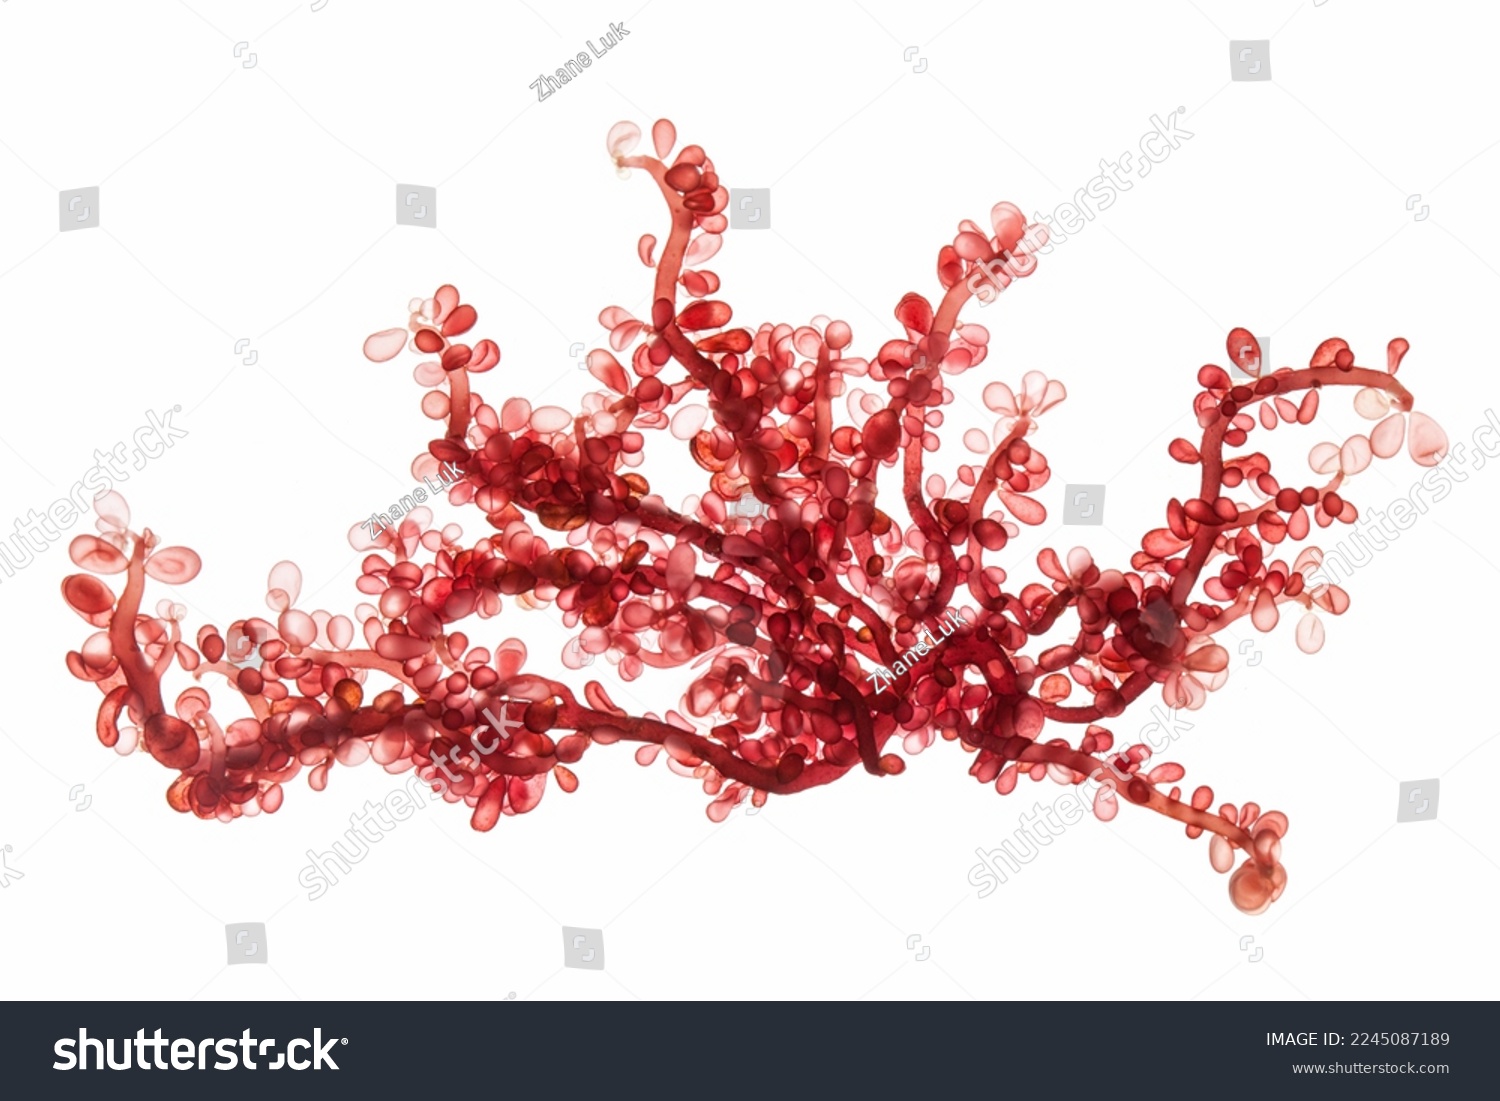 red sea grapes seaweed isolated on white background. #2245087189